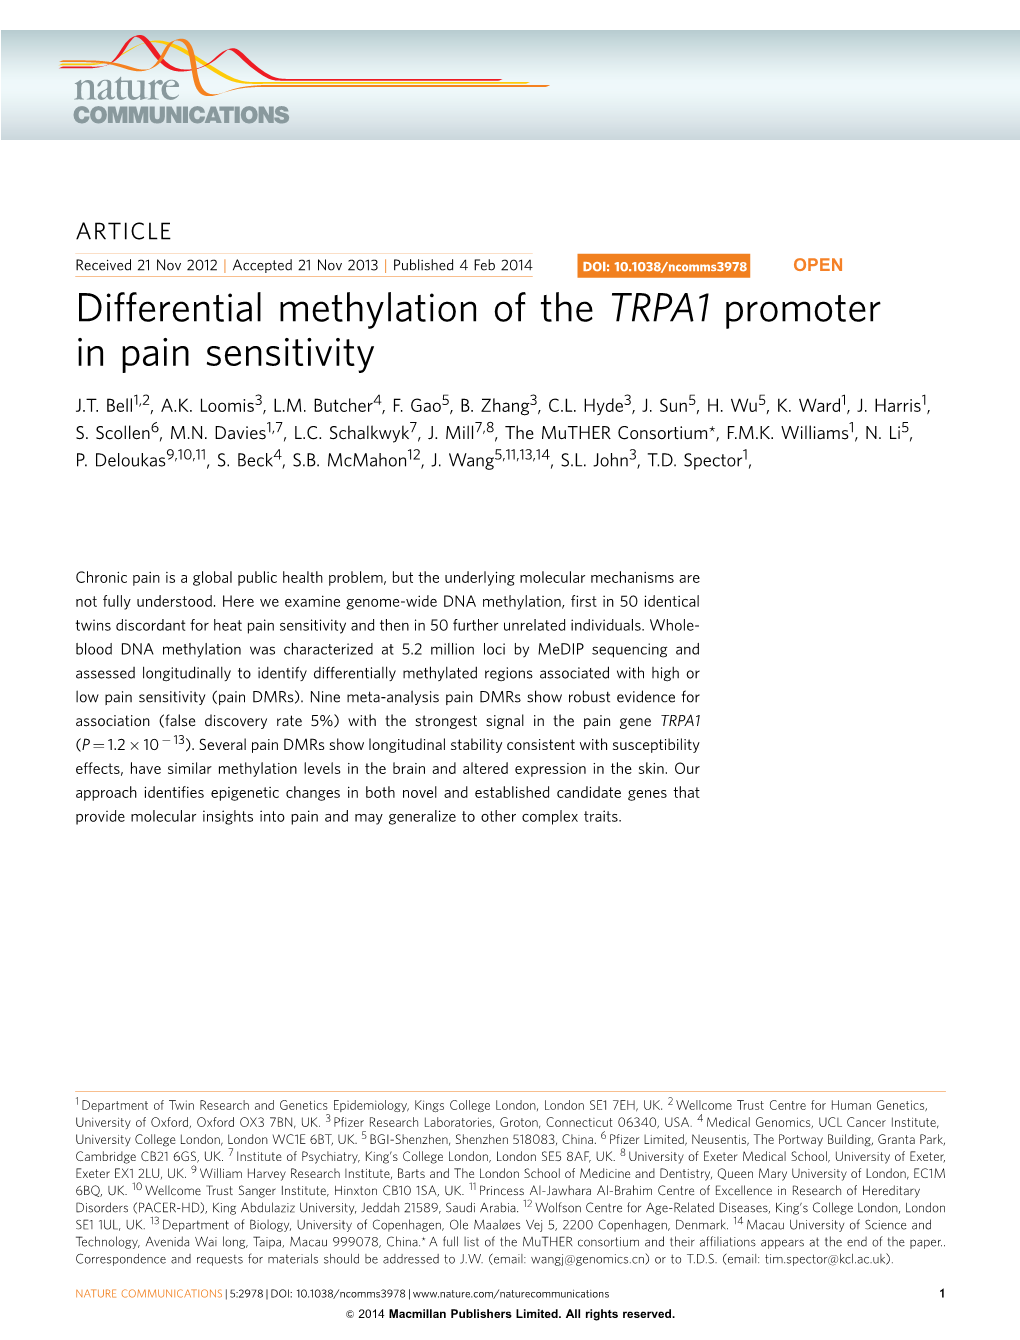 Differential Methylation of the TRPA1 Promoter in Pain Sensitivity